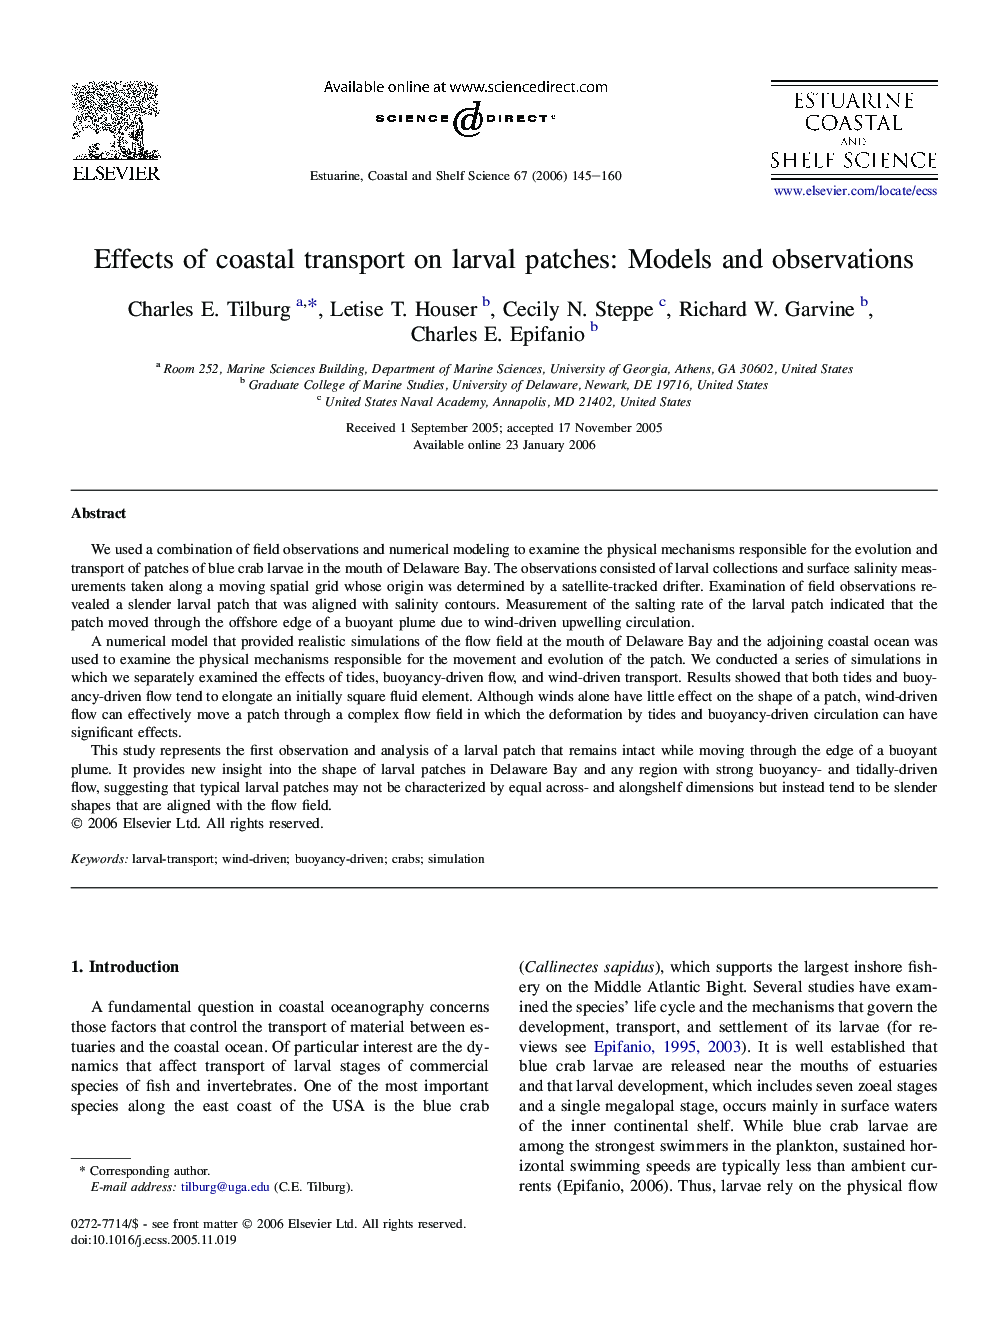 Effects of coastal transport on larval patches: Models and observations